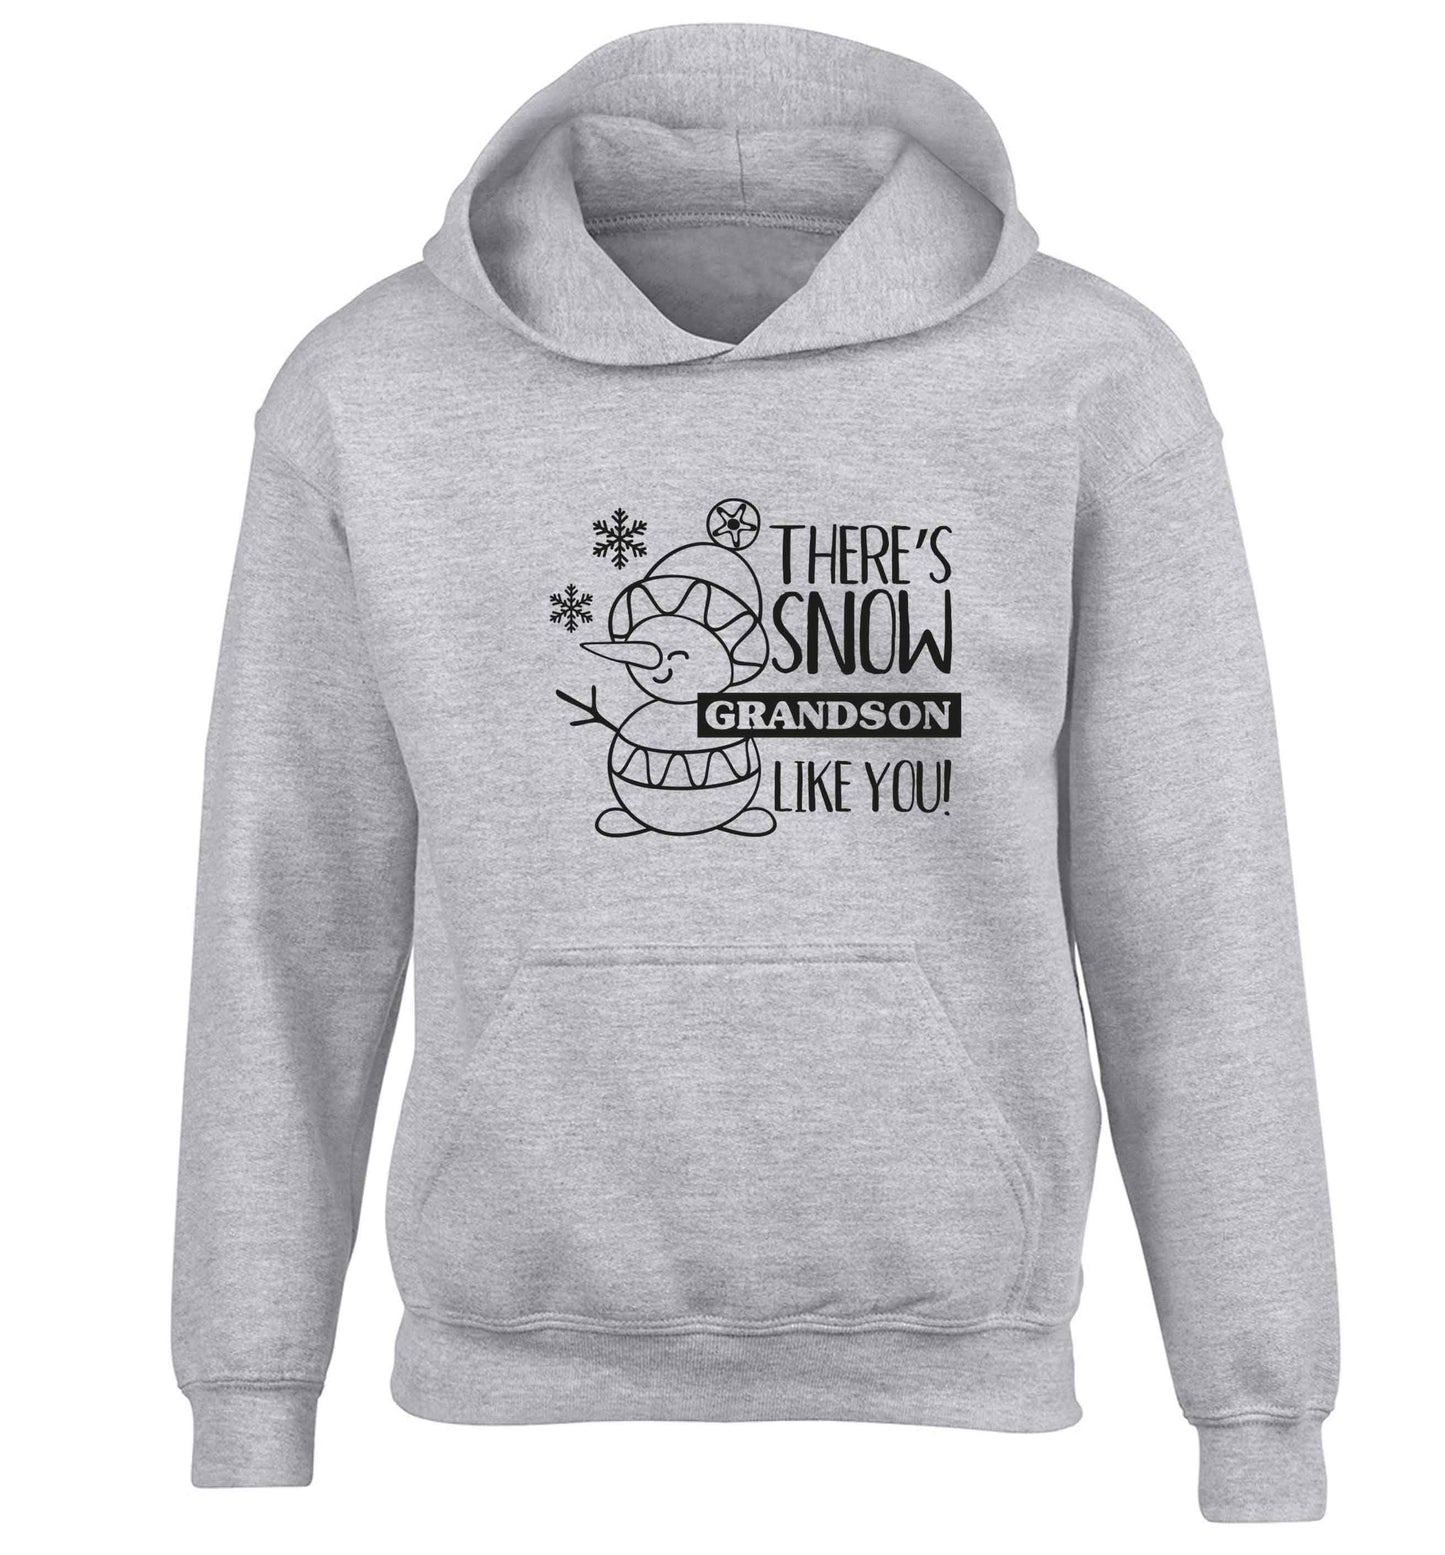 There's snow grandson like you children's grey hoodie 12-13 Years